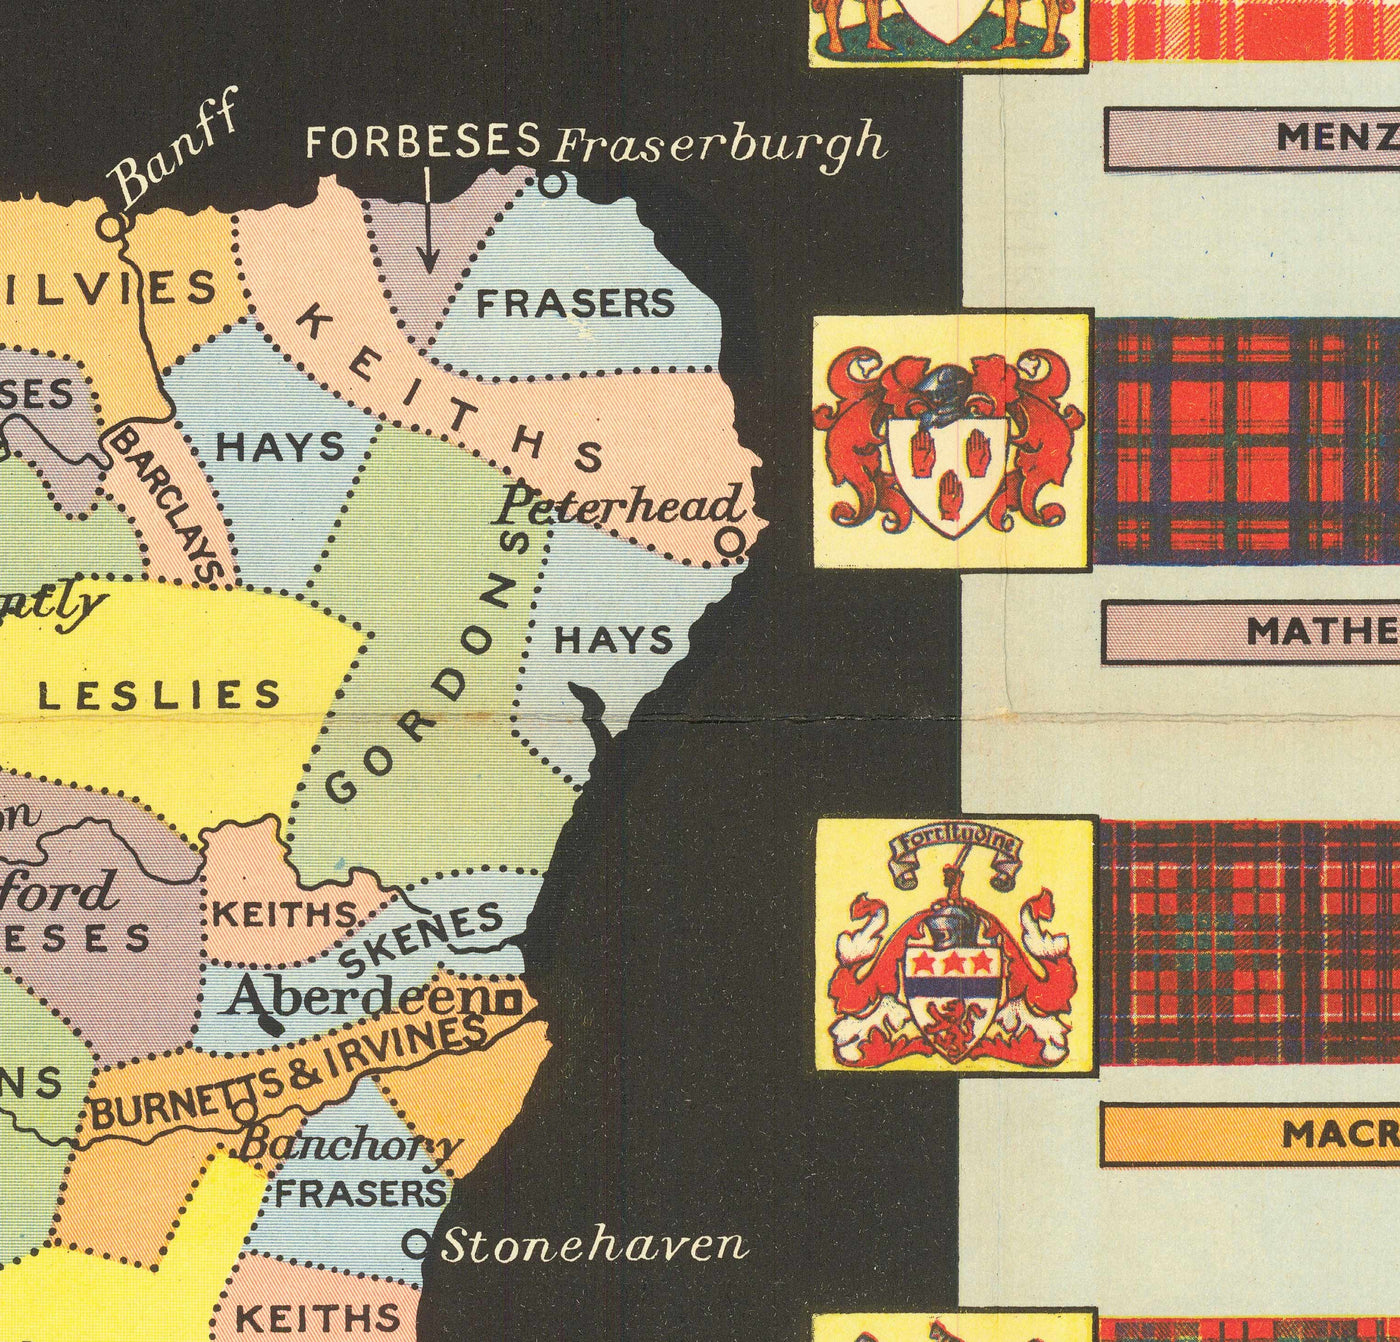 Old Map of Scotland Clans and Tartans - Johnston's Highlands & Lowlands Scottish Chart